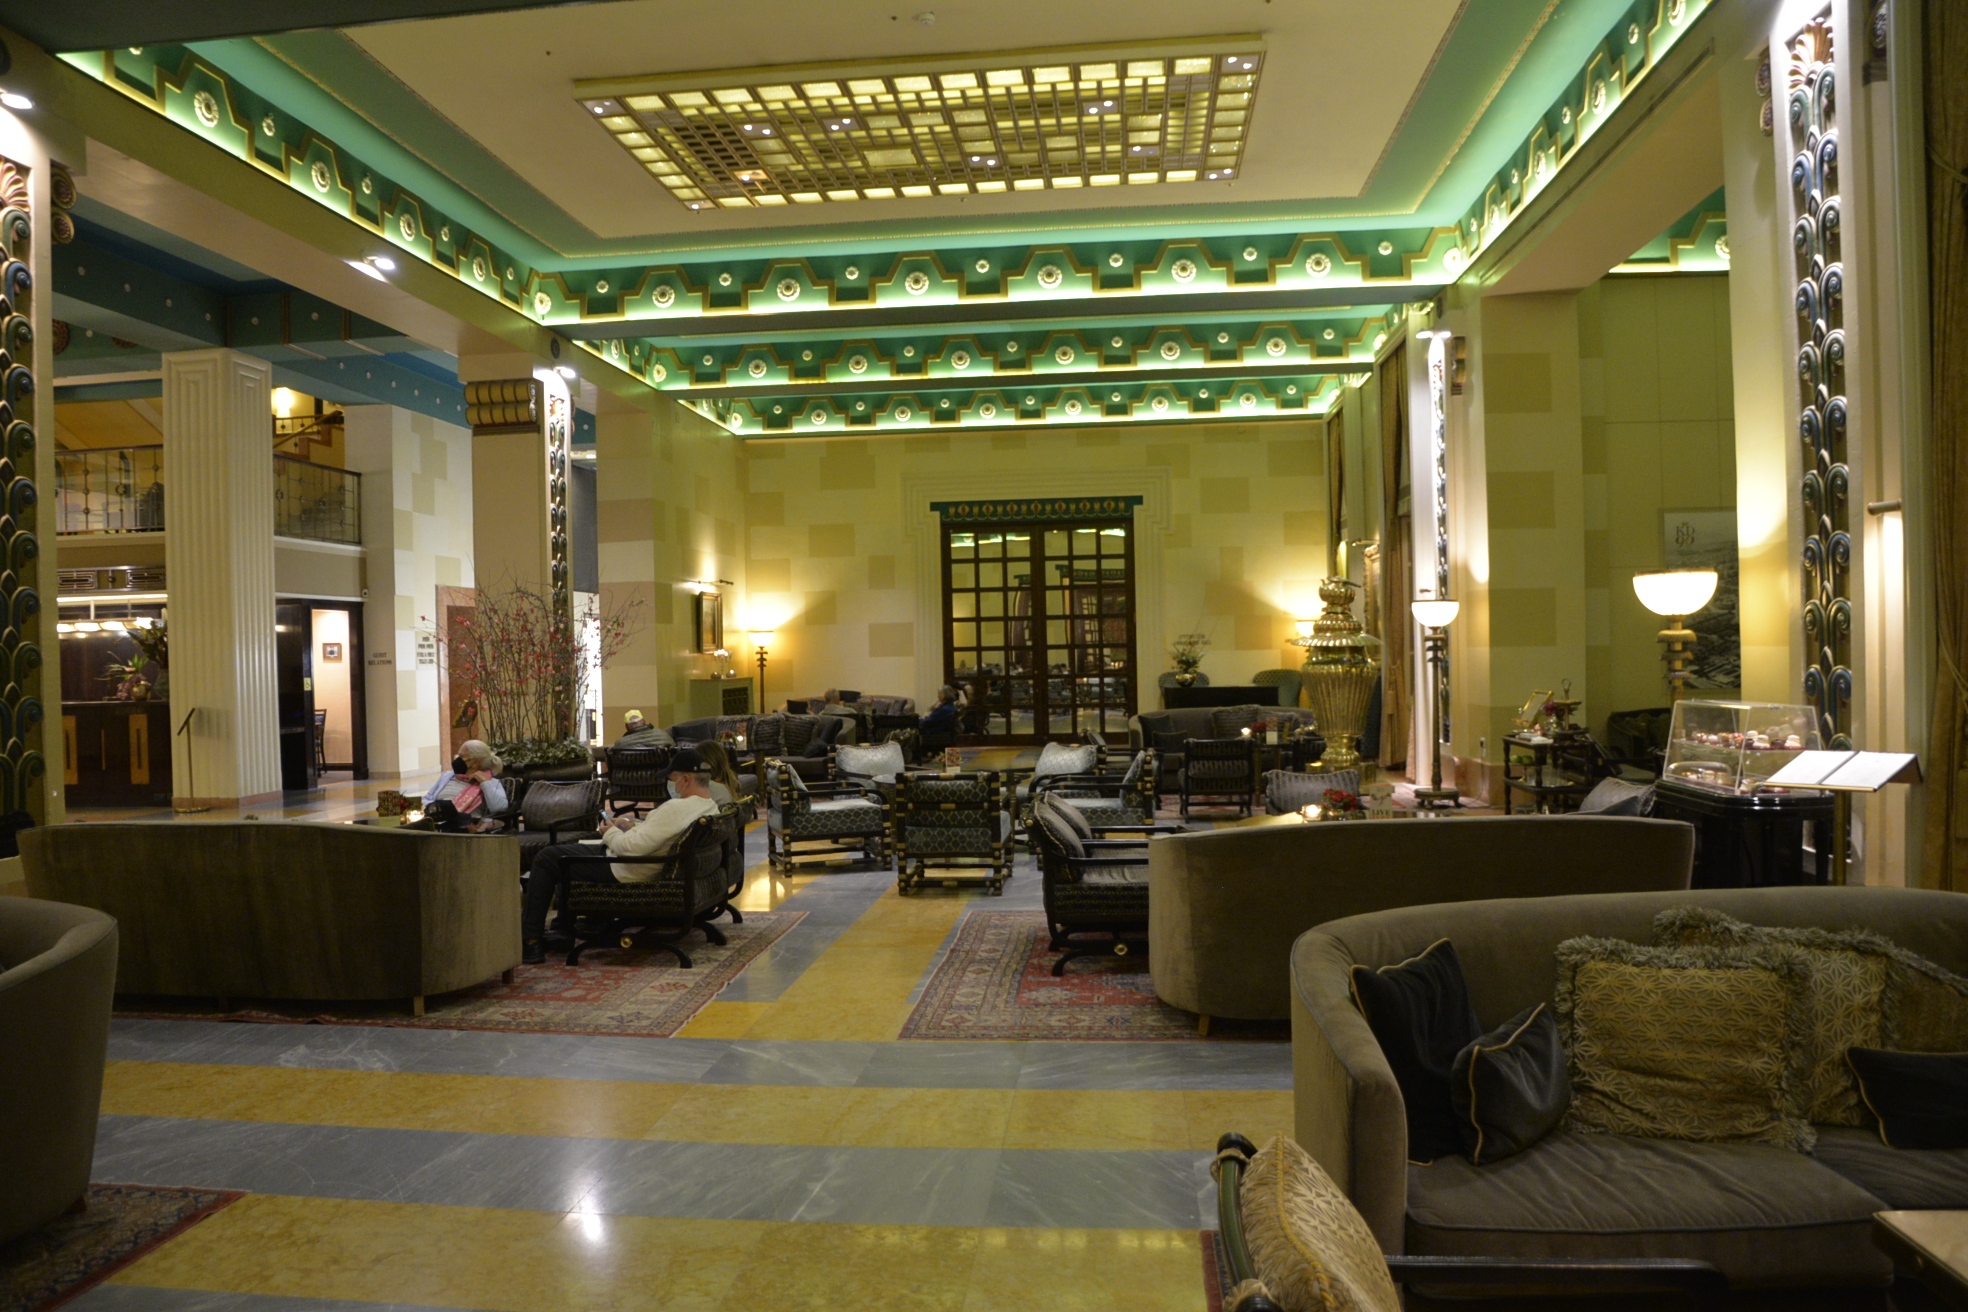 The luxurious and prestigious King David Hotel was just around the corner.